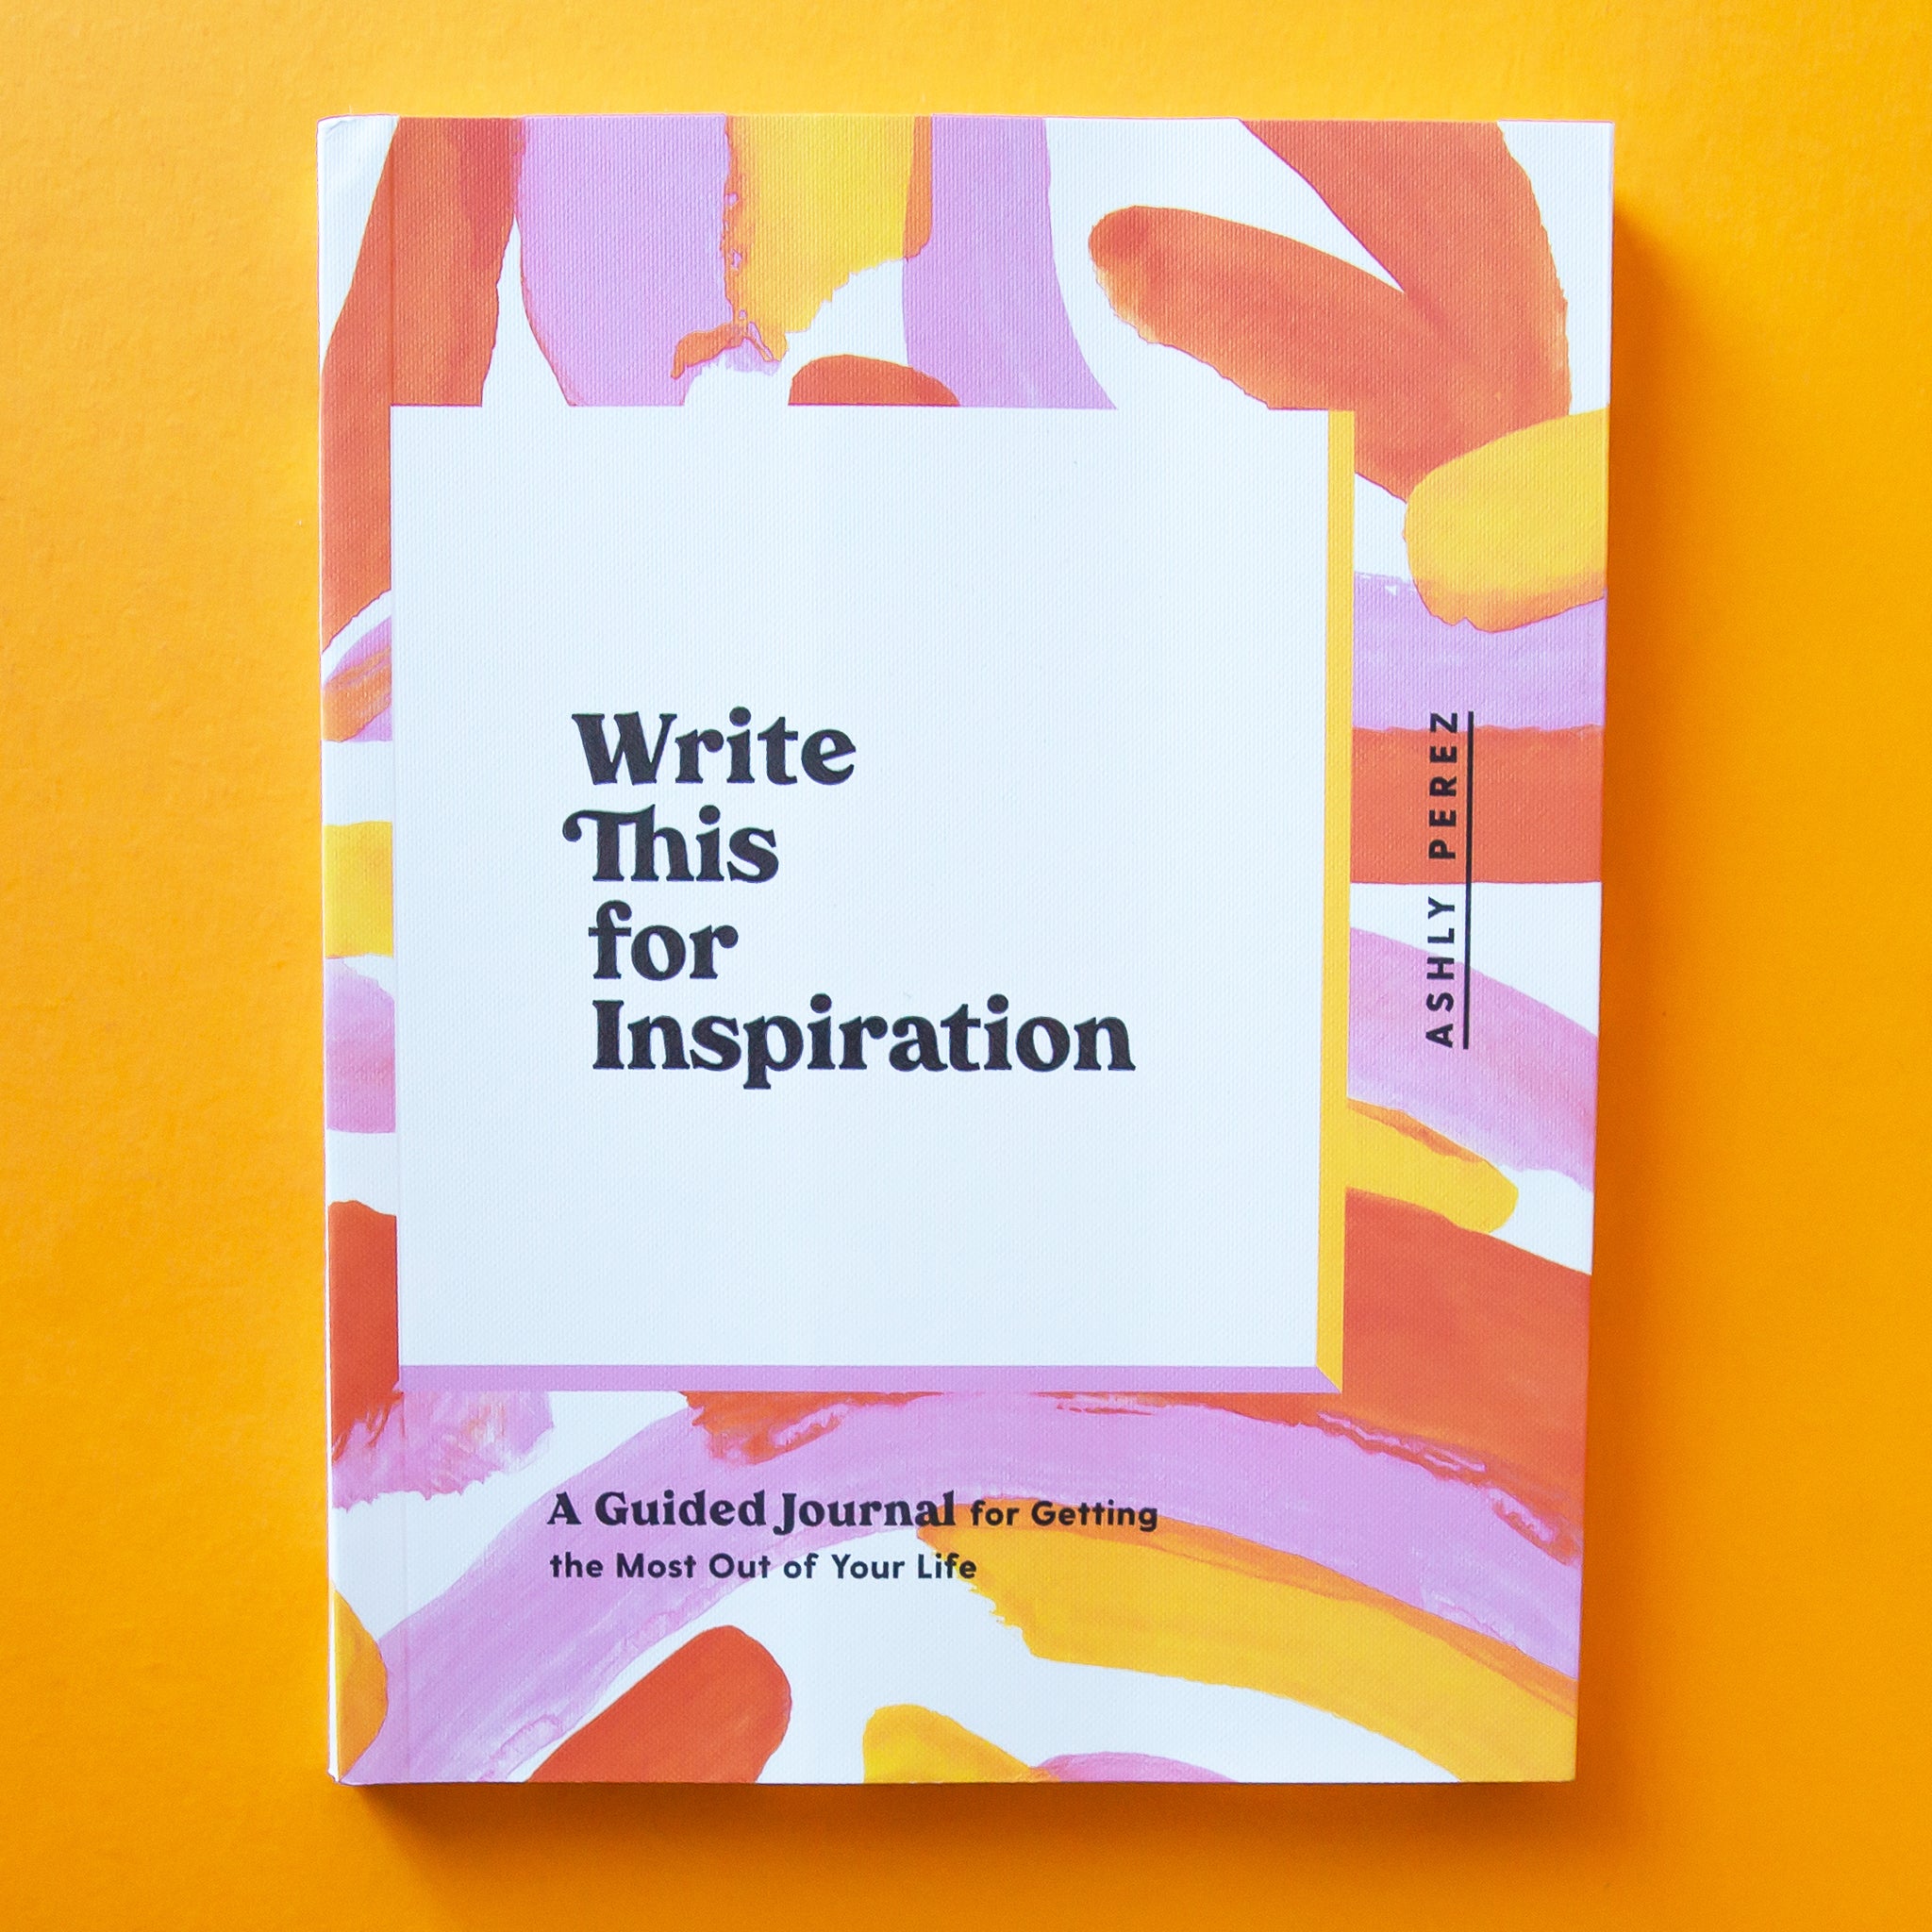 This journal is titled 'Write This for Inspiration by Ashly Perez' in black lettering and has an enjoyable free-hand painted design with shades of pinks and oranges on top of a white background. The binding of the book is also white with the title spelt out in similar colorful lettering.